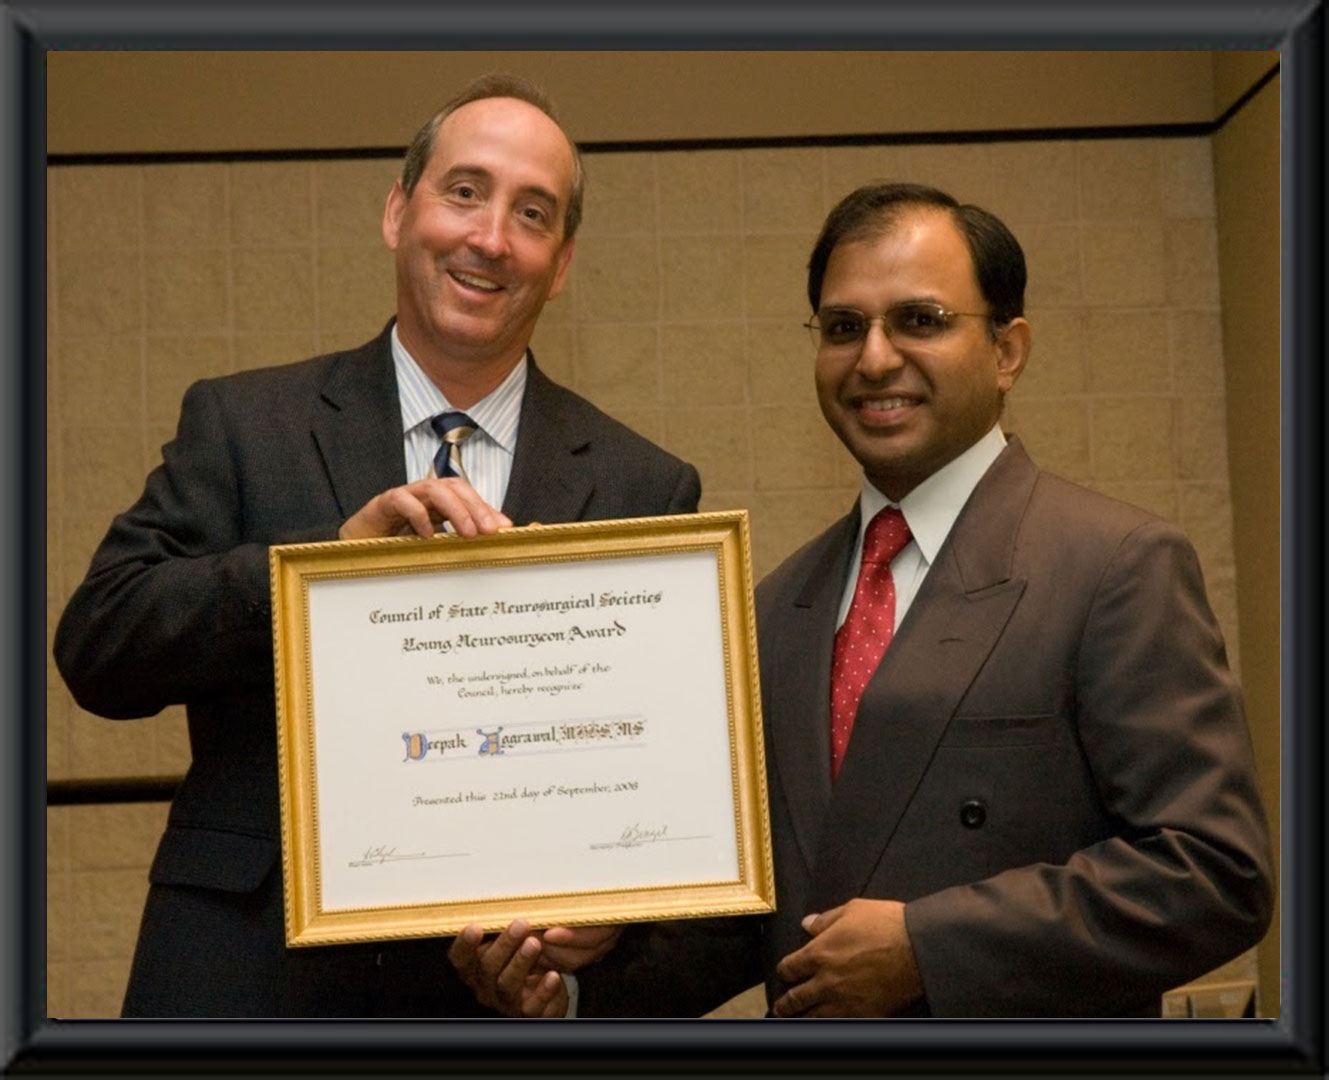 YOUNG NEUROSURGEON OF THE YEAR AWARDED BY CNS/CSNS, USA